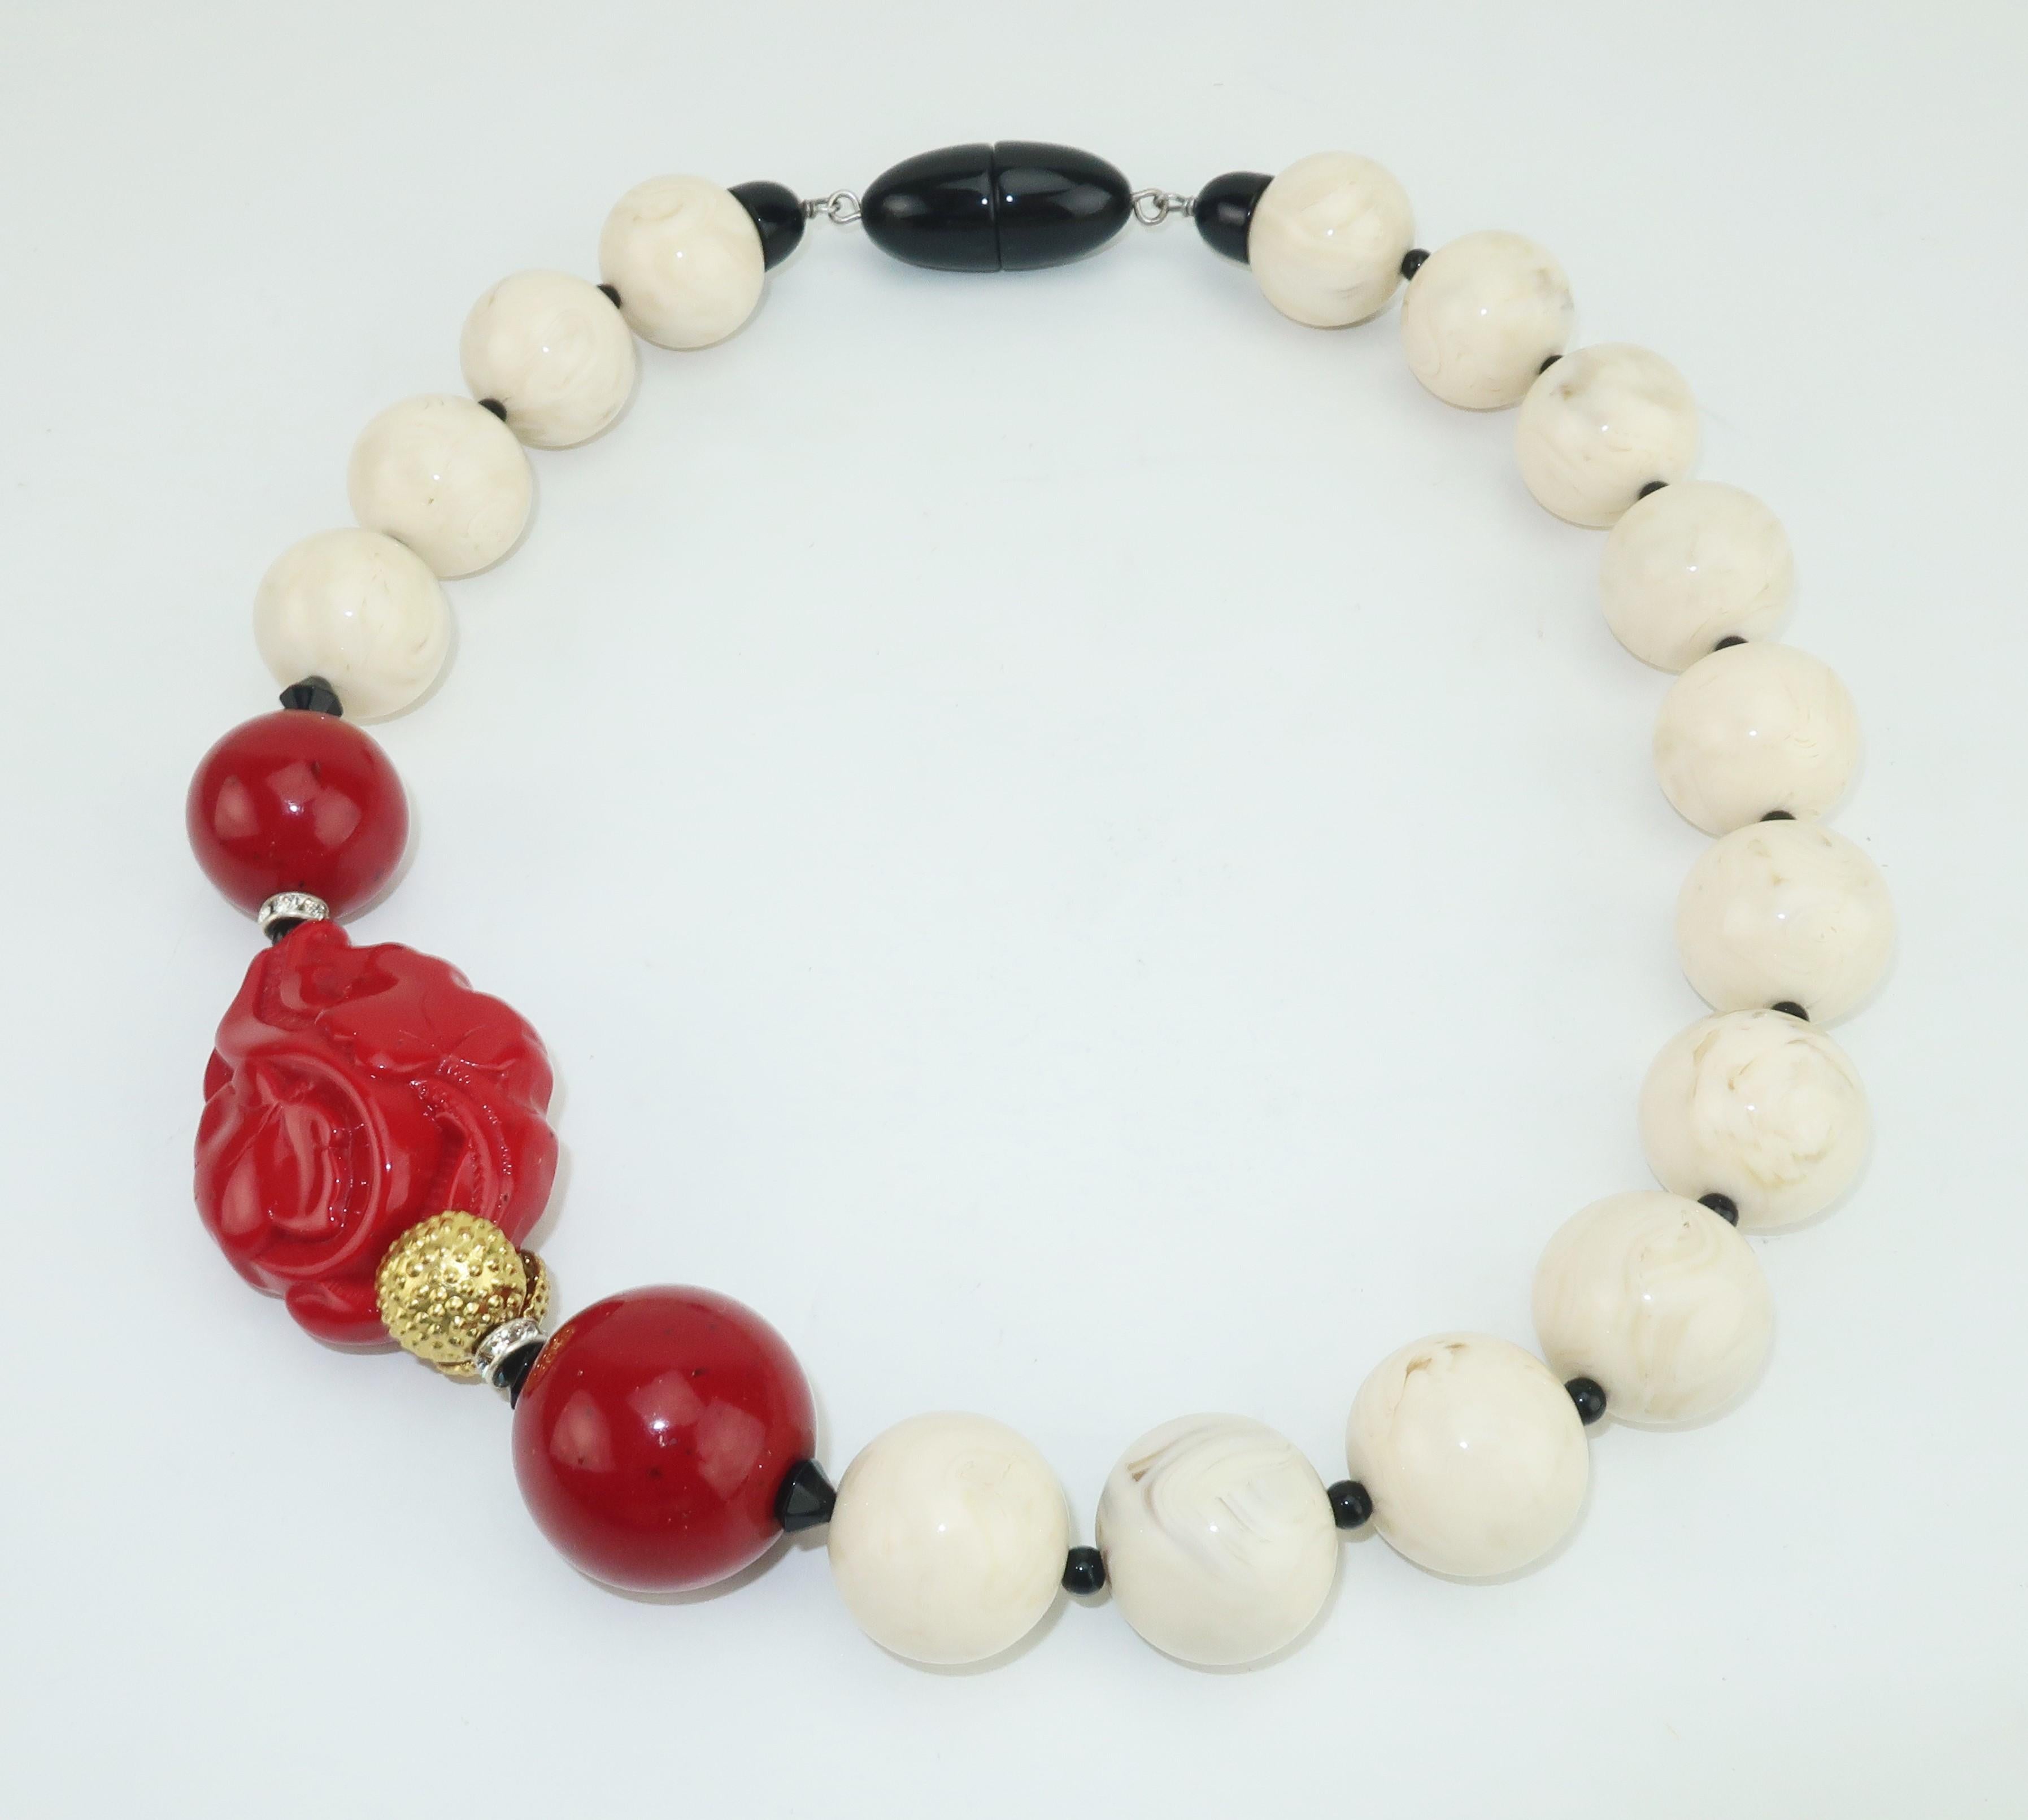 A beautiful statement making necklace from Italian designer, Angela Caputi.  The Asian inspired design is reminiscent of Art Deco creations with a combination of resin beads in shades of ivory, onyx and coral or cinnabar.  A subtle touch of crystal